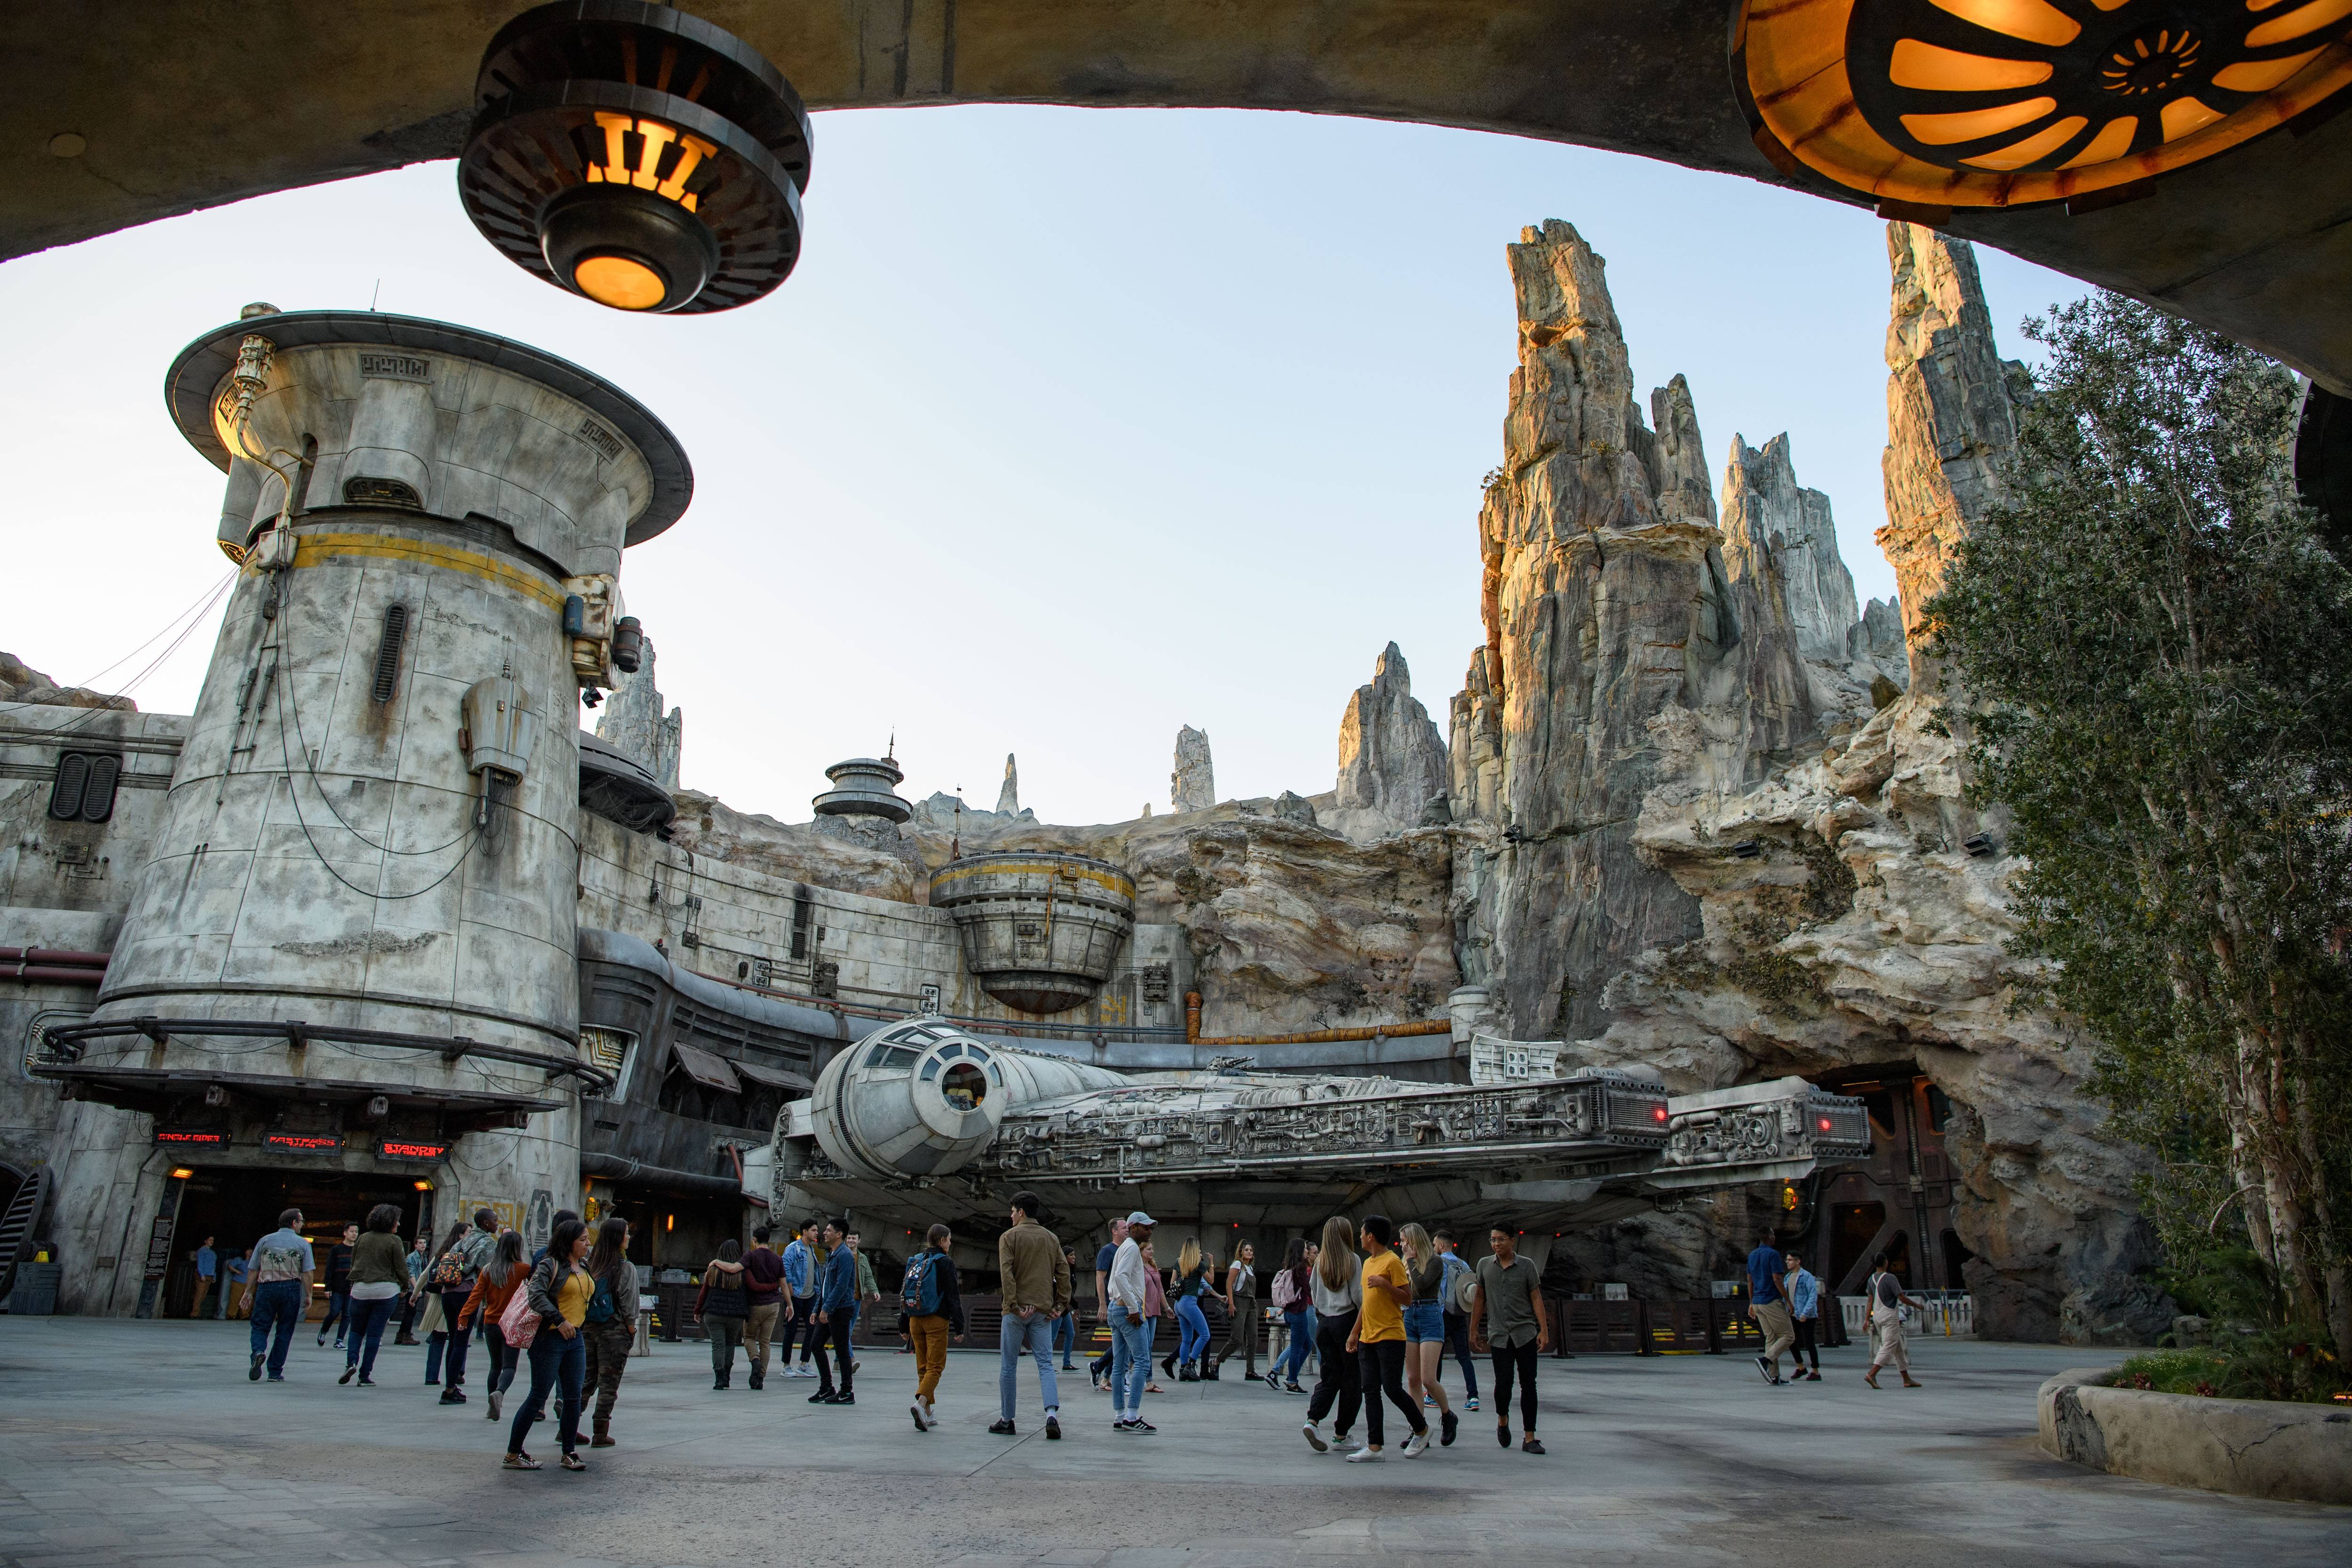 Millennium Falcon Smugglers Run overview